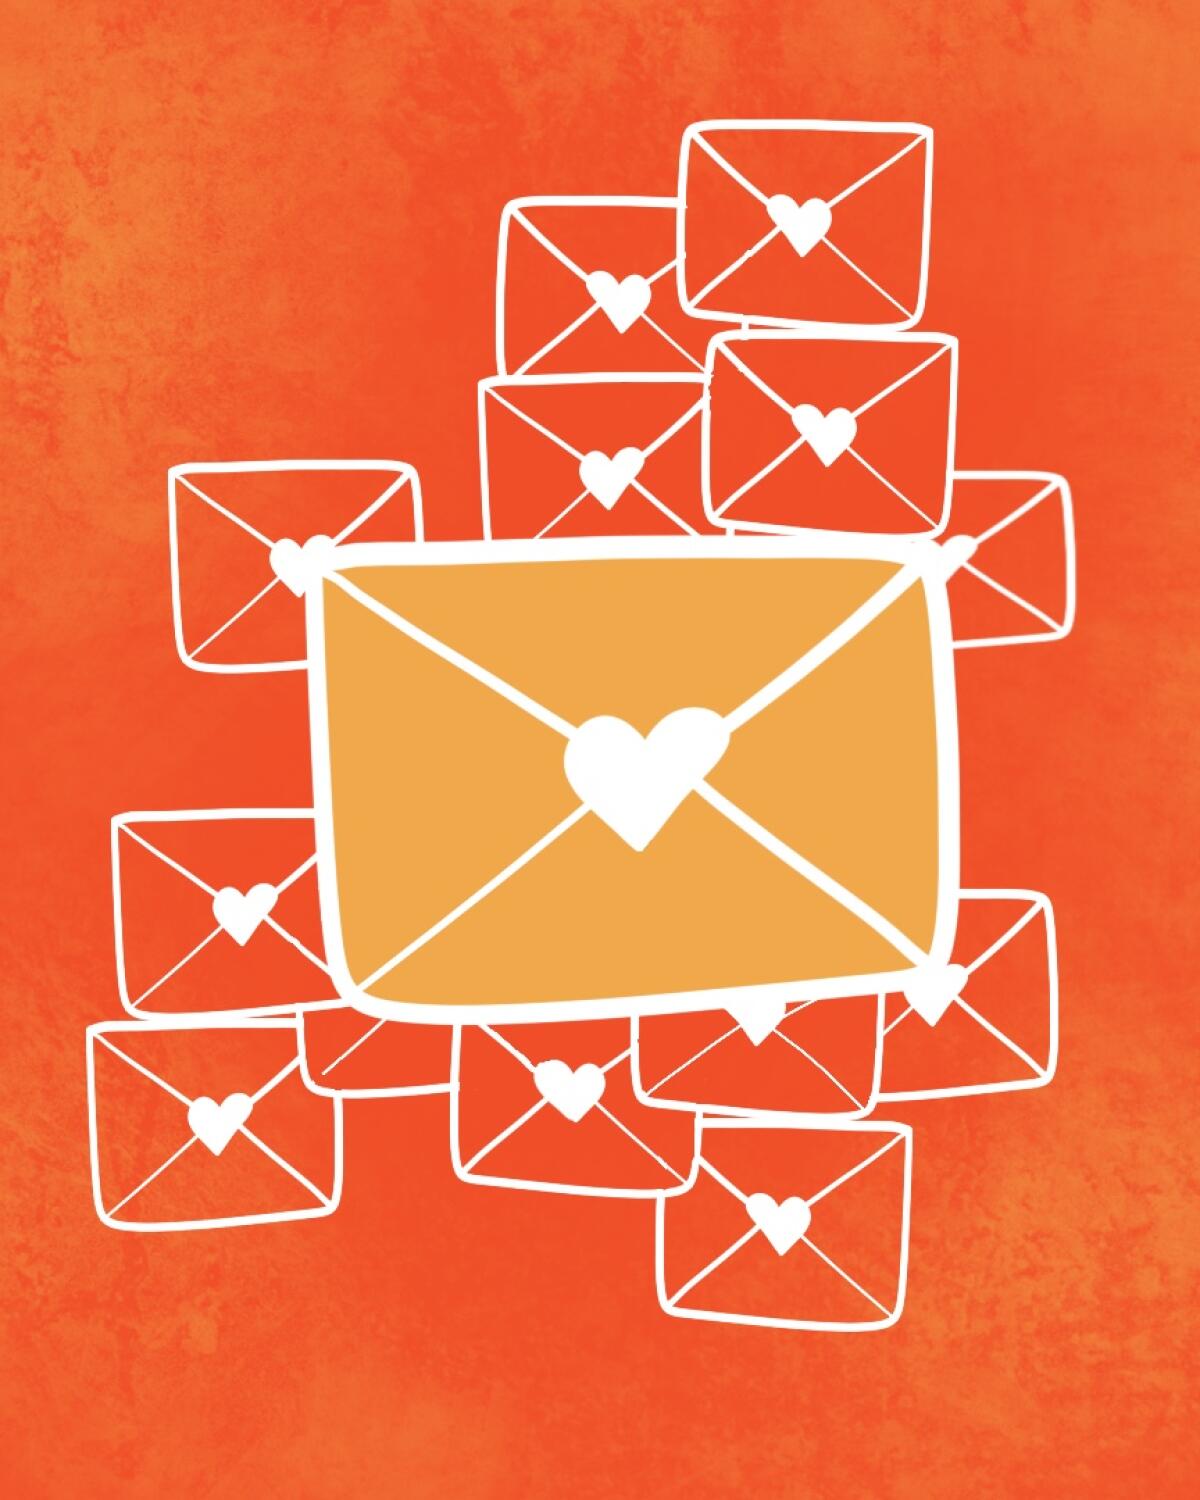 illustration of love letters in envelopes sealed with a heart.